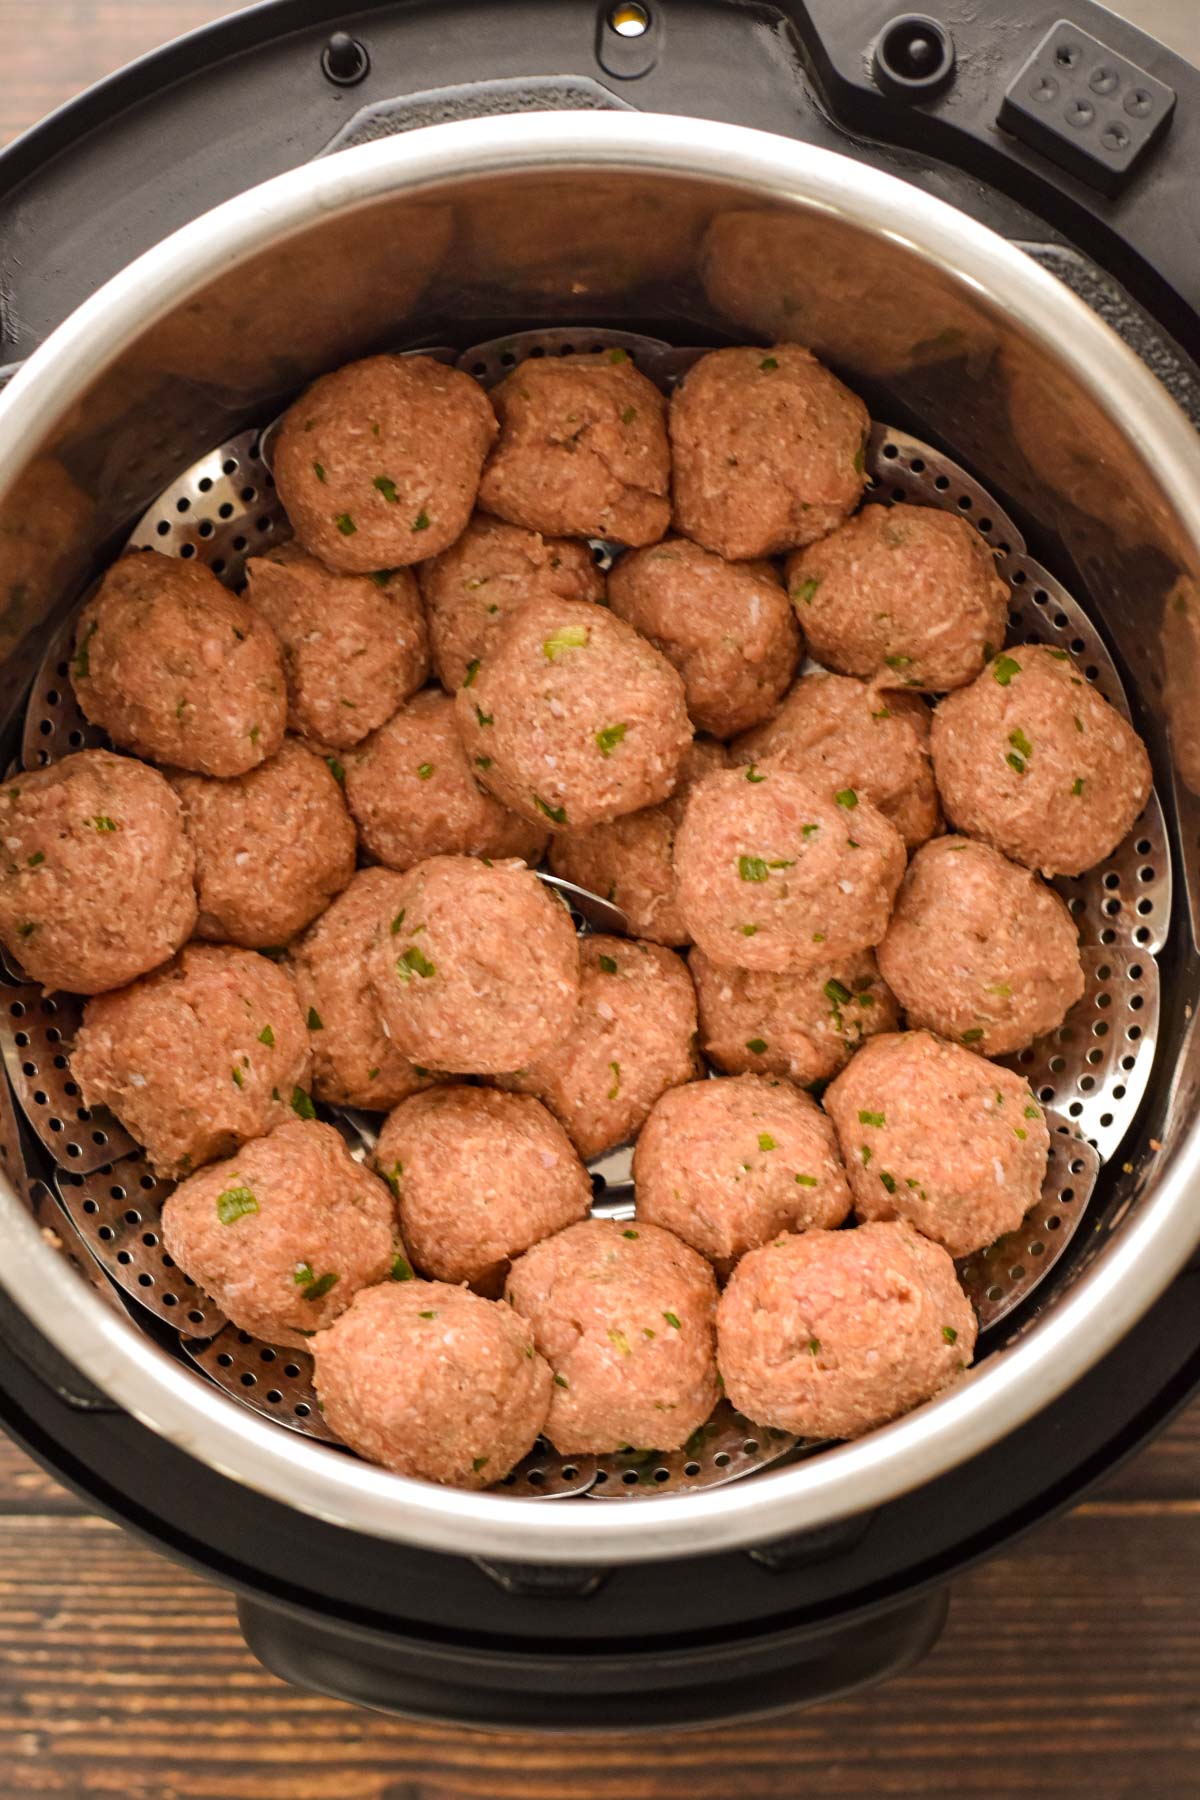 process shot of after raw low fodmap turkey meatballs have been placed on the vegetable steamer in the instant pot